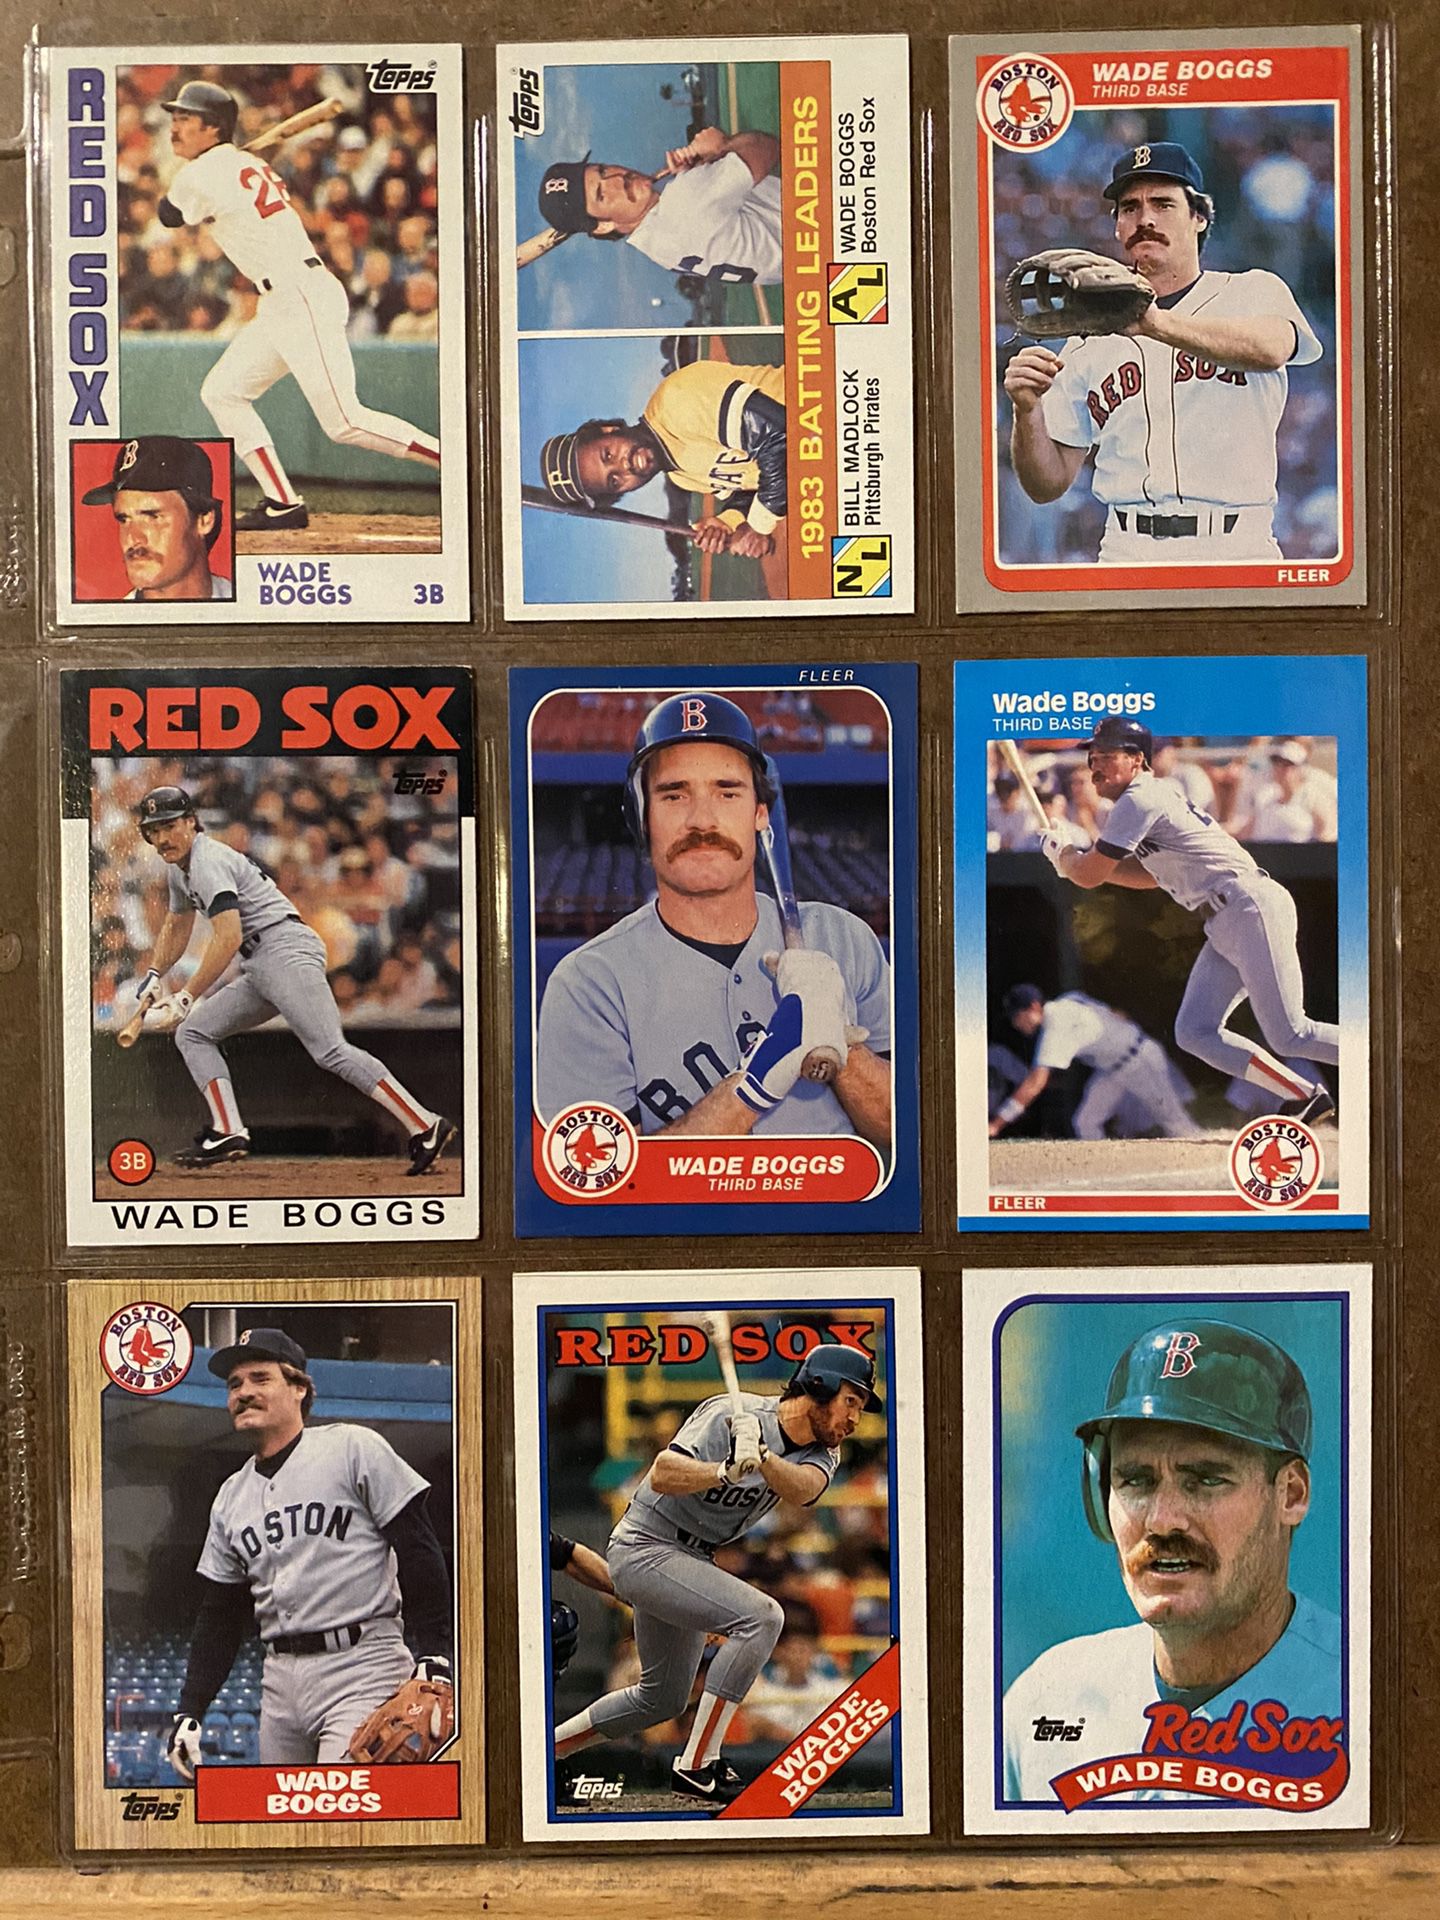 Baseball Card Pages $5 each!